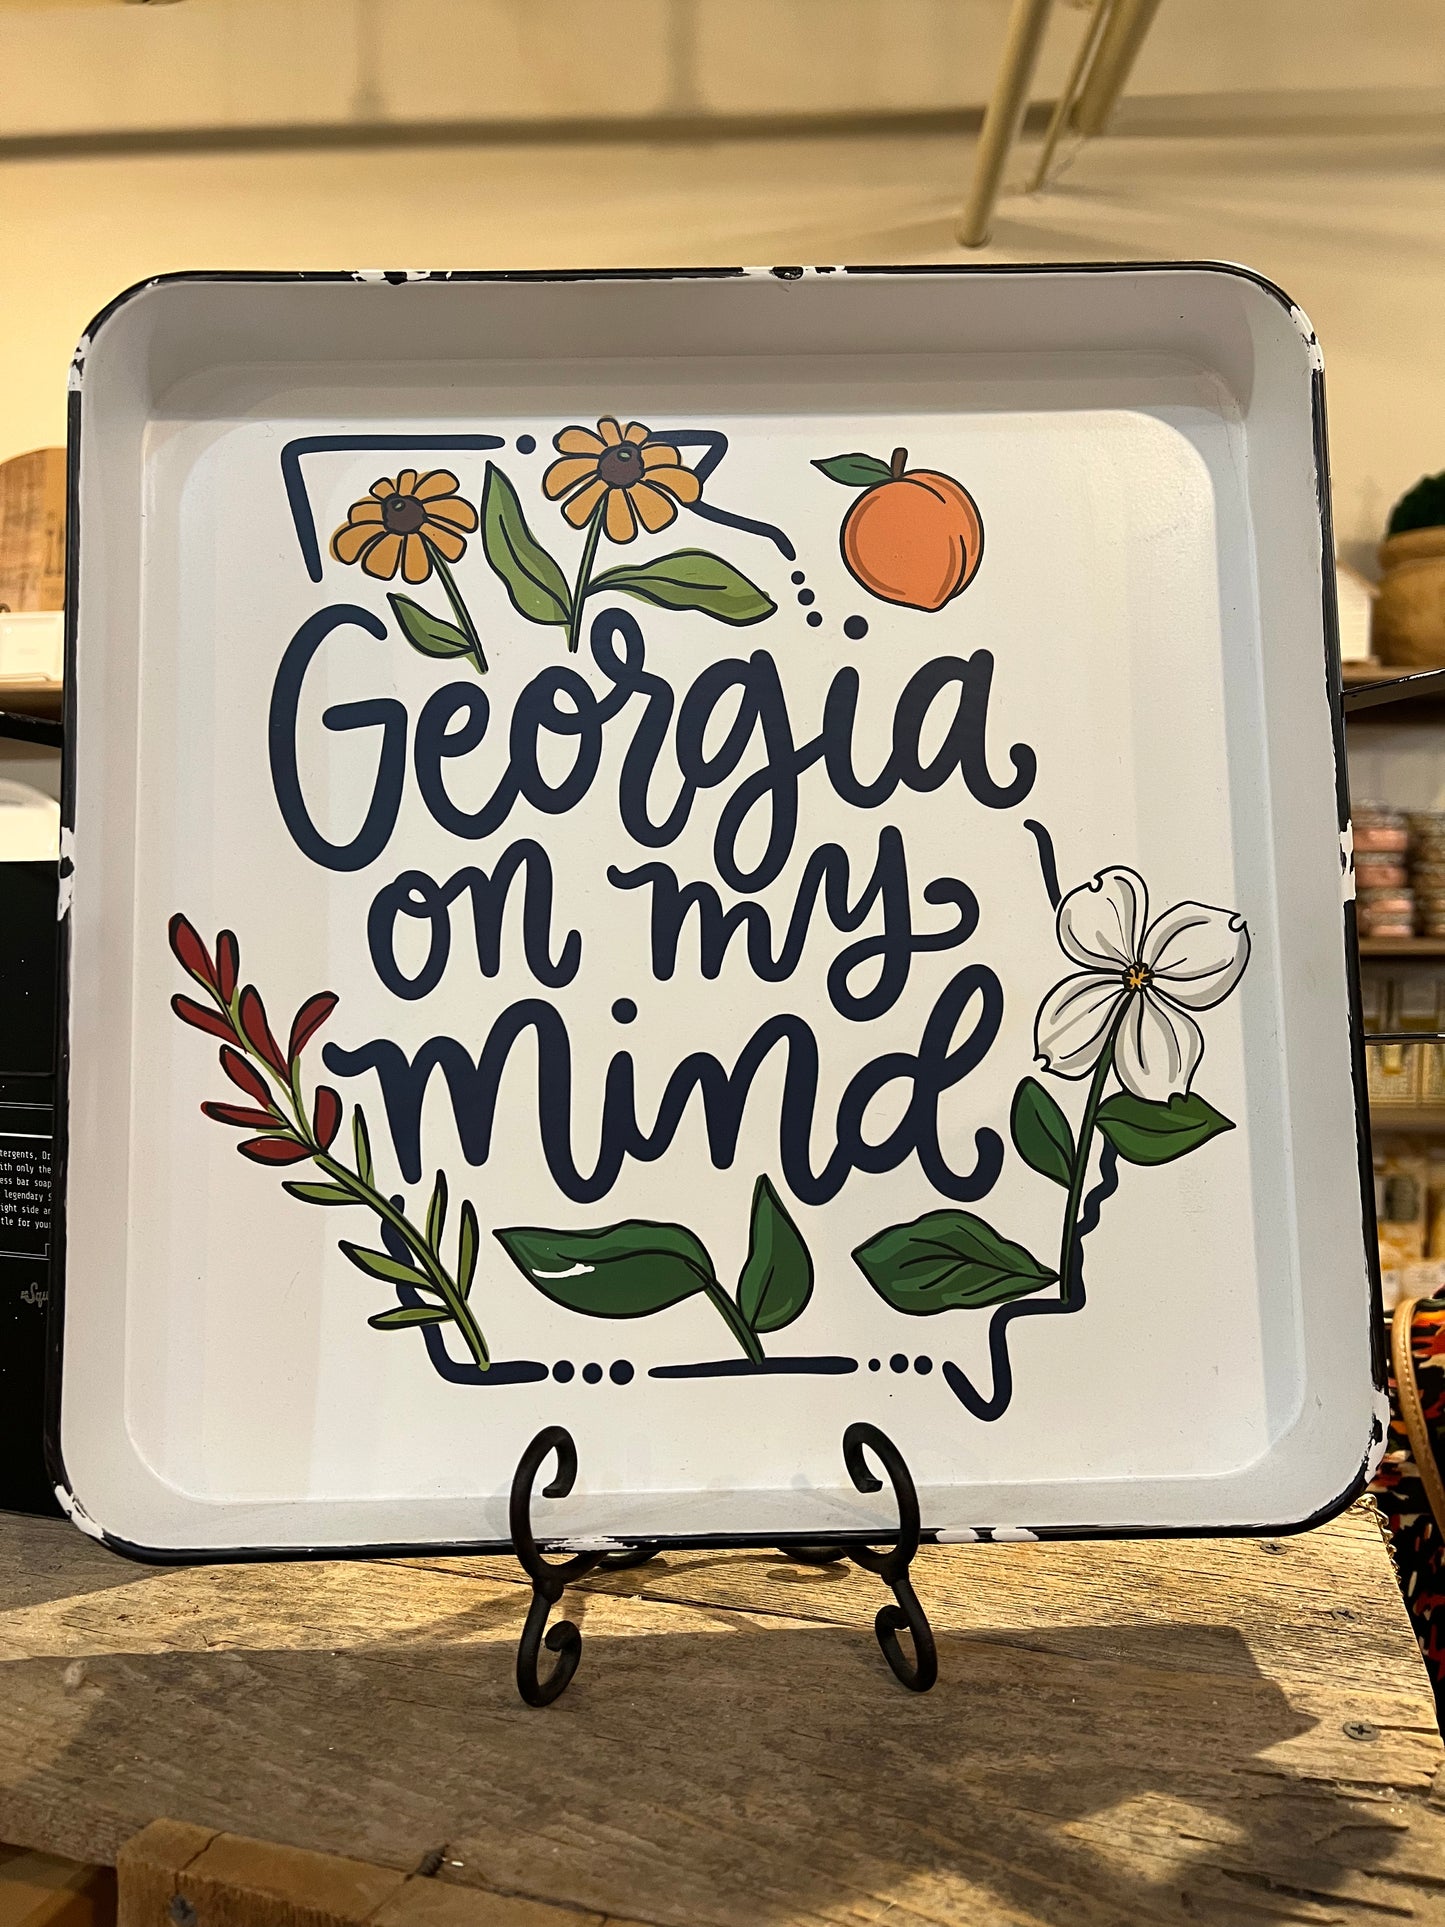 White tray with the outline of Georgia featuring depictions of the state and "Georgia on my mind".